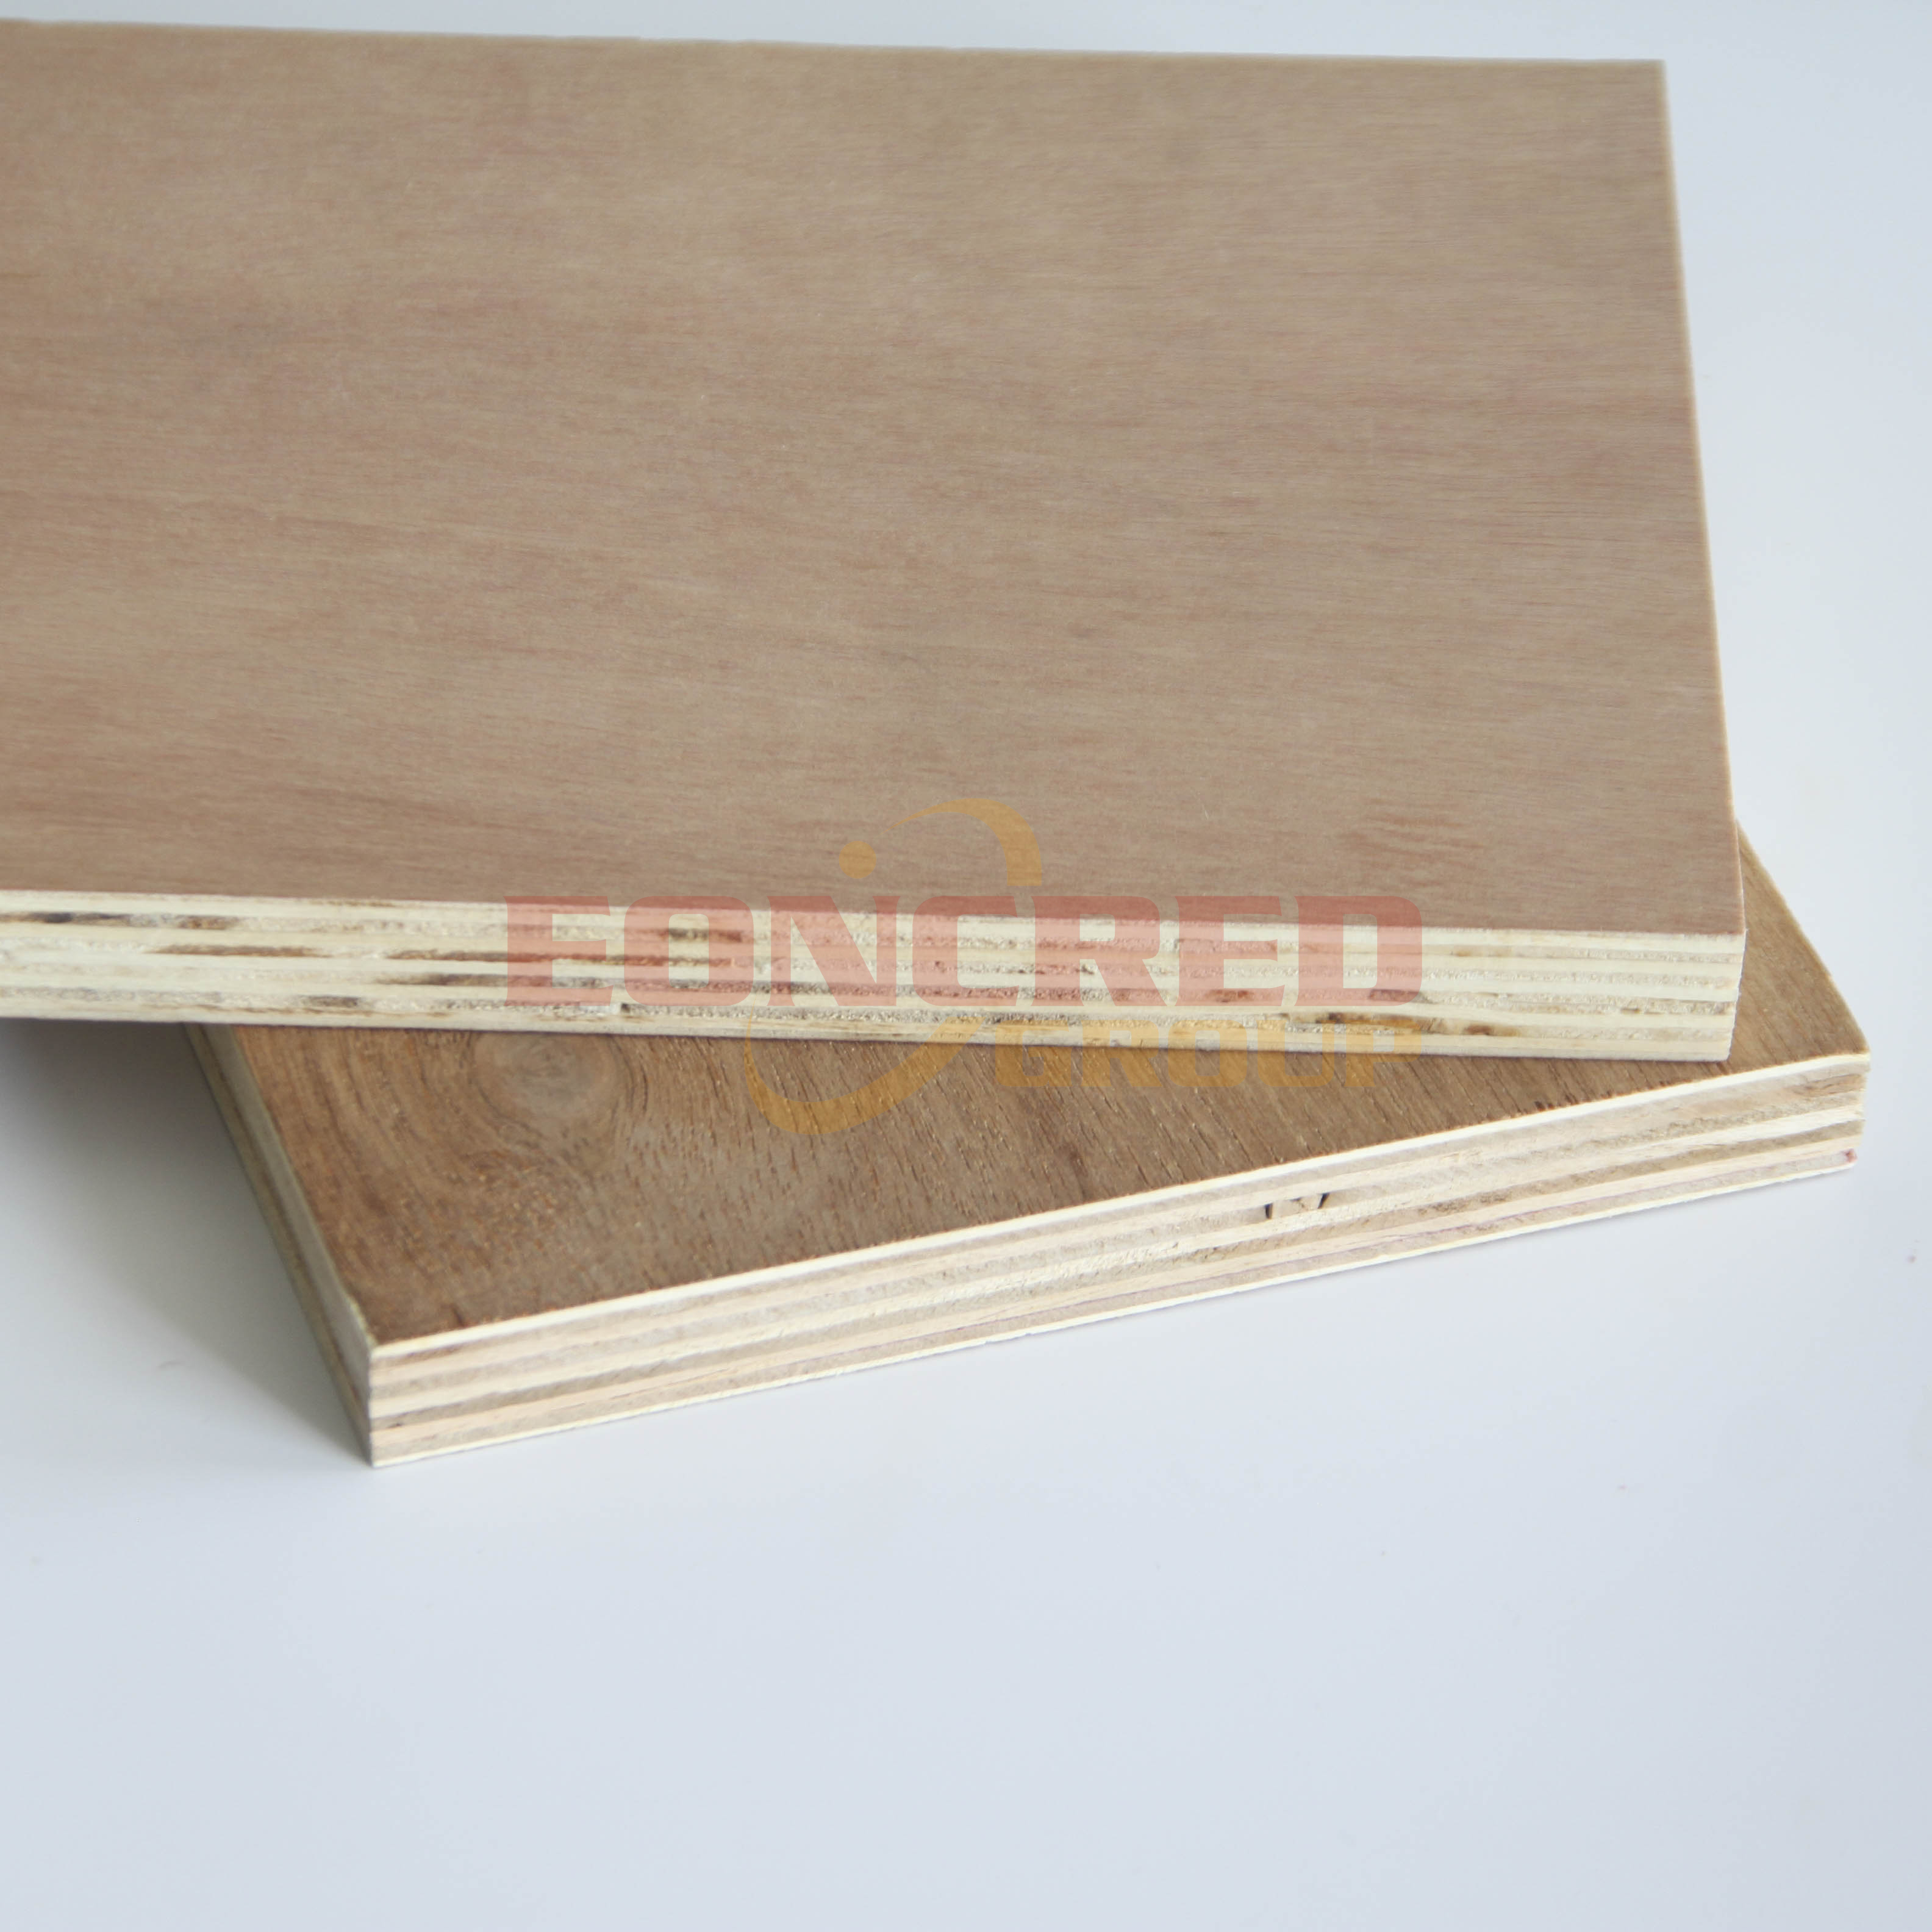 Plywood Making Equipment Is Used for High Quality Plywood